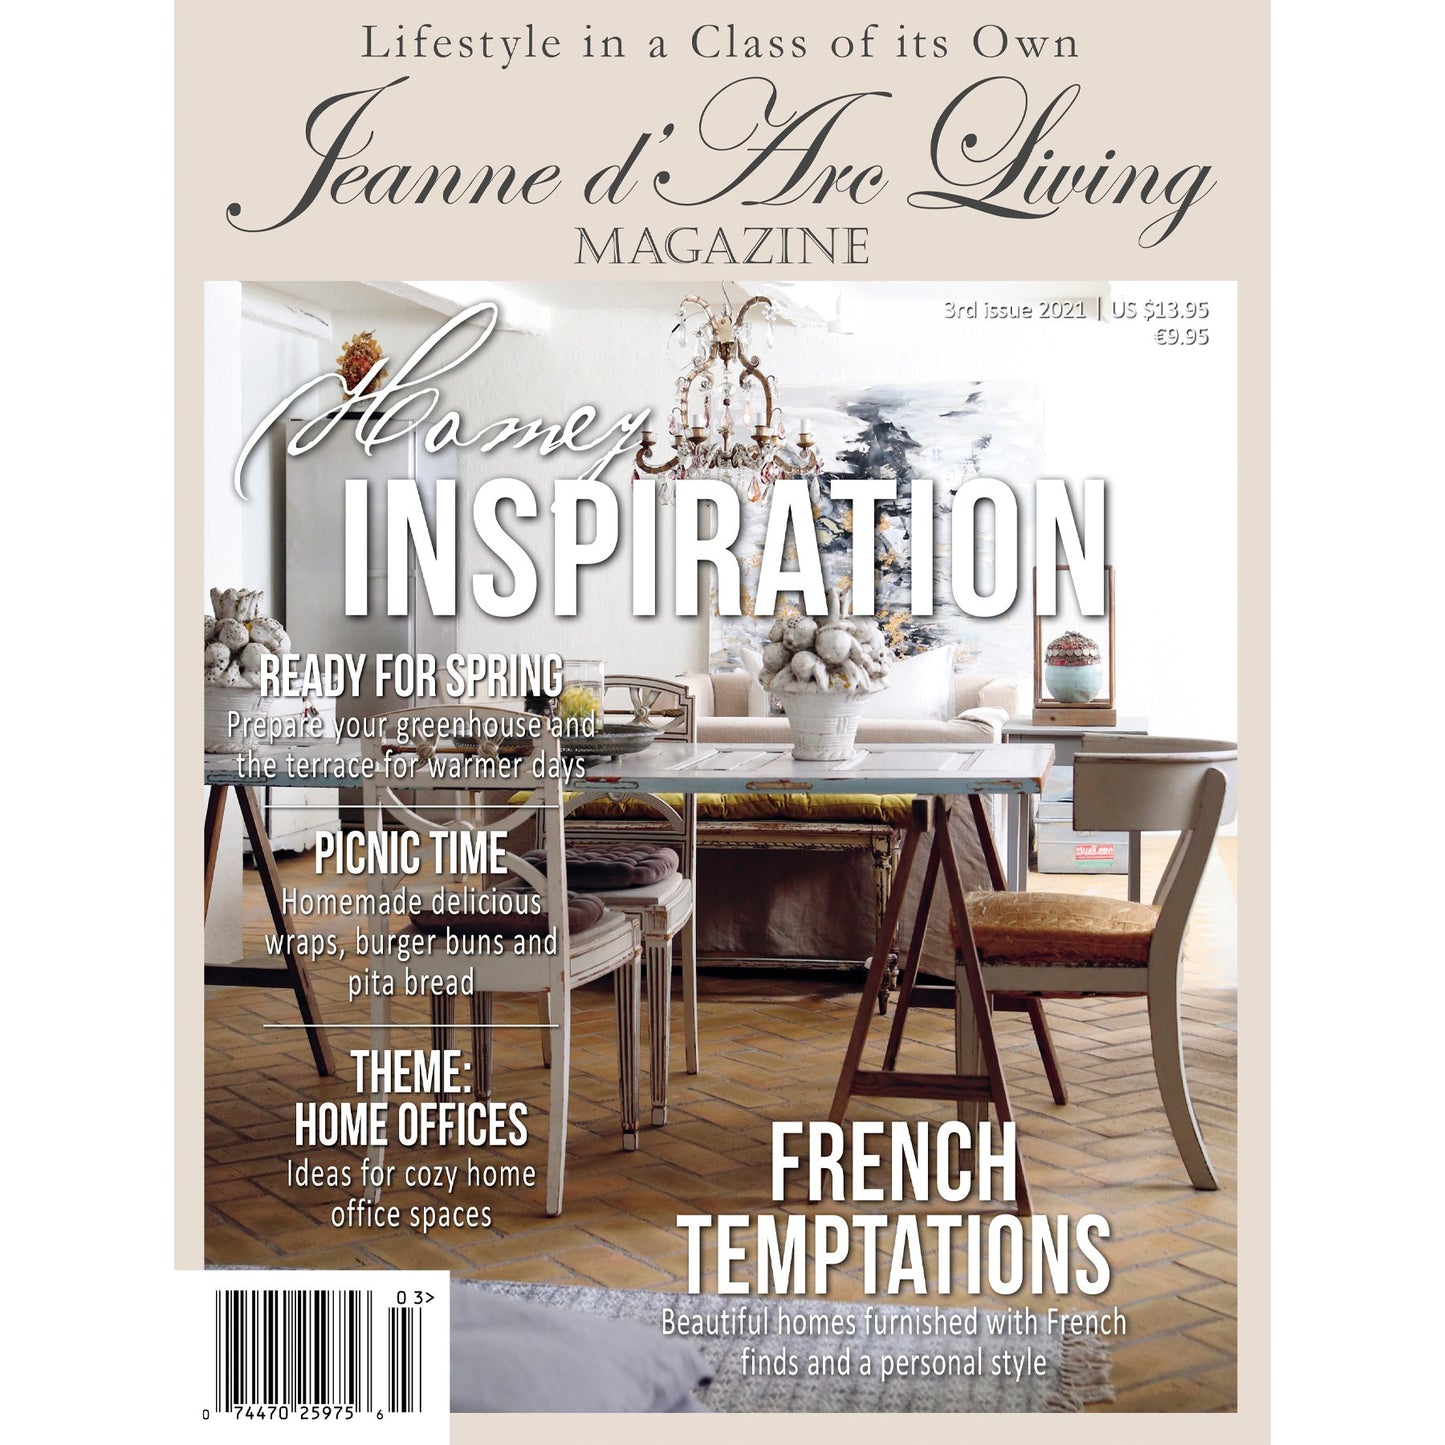 3rd Issue 2021 Jeanne d'Arc Living